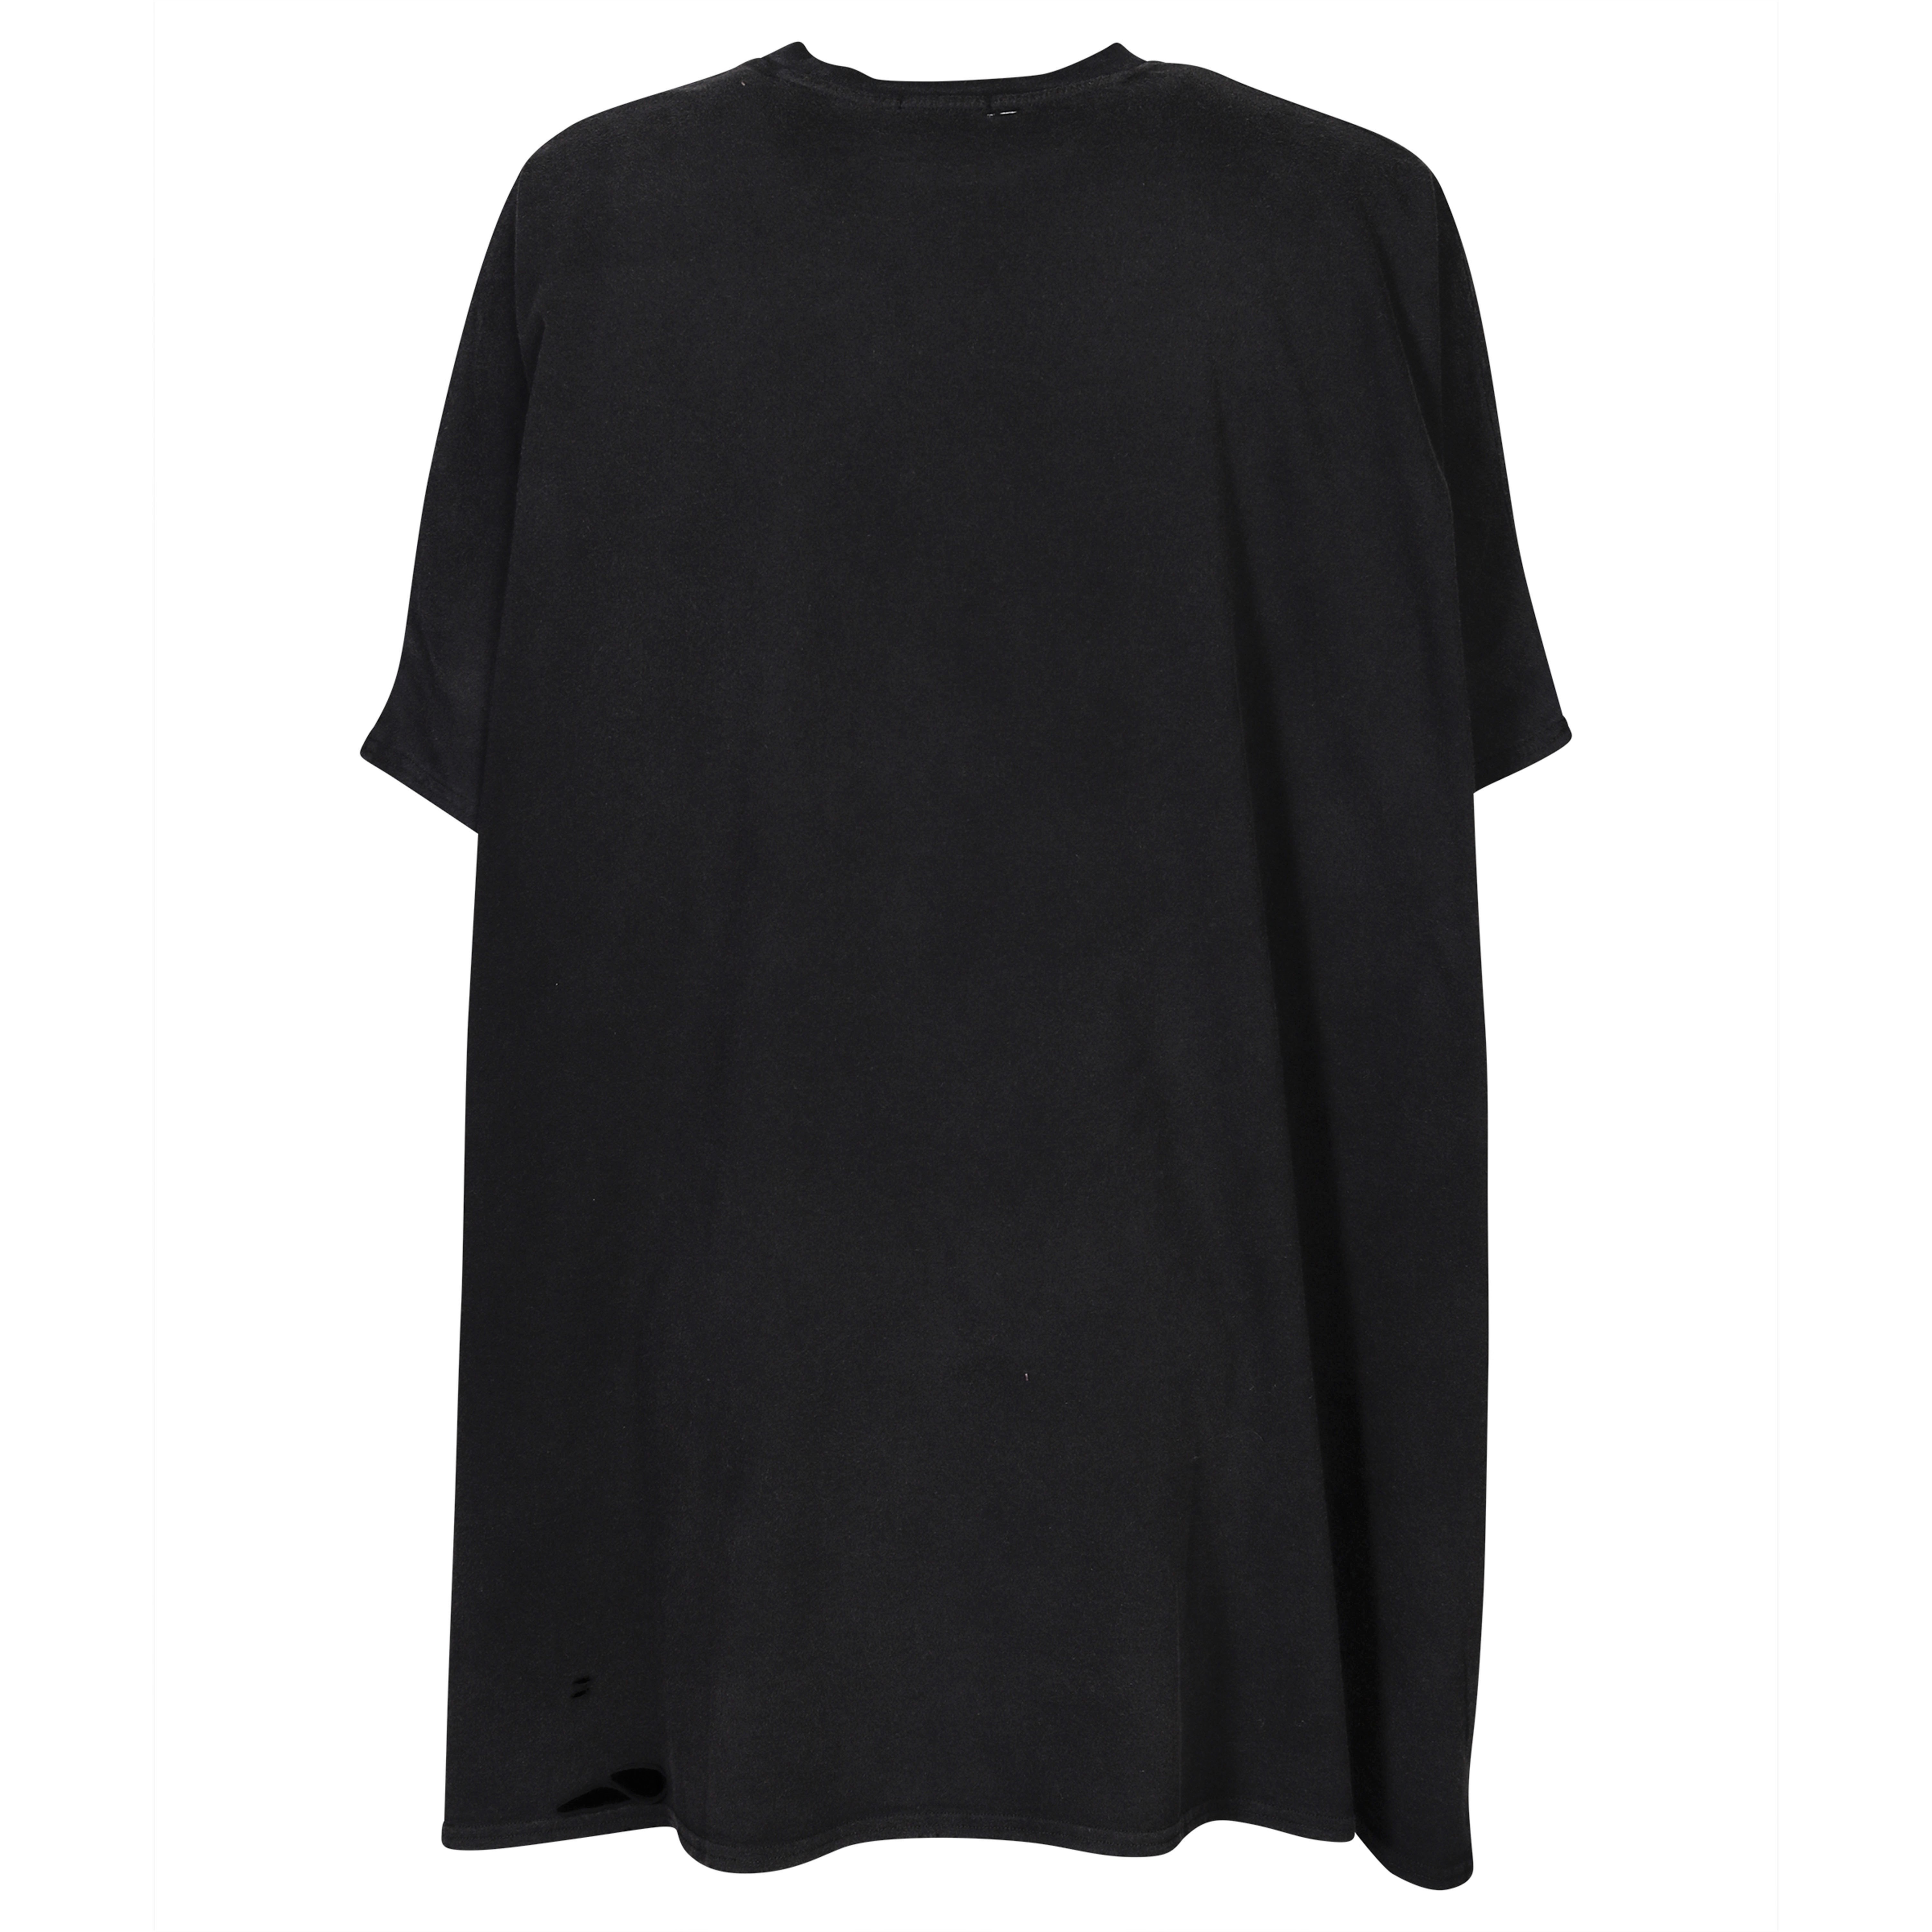 R13 Destroyed Oversize Boxy T-Shirt Dress in Black S